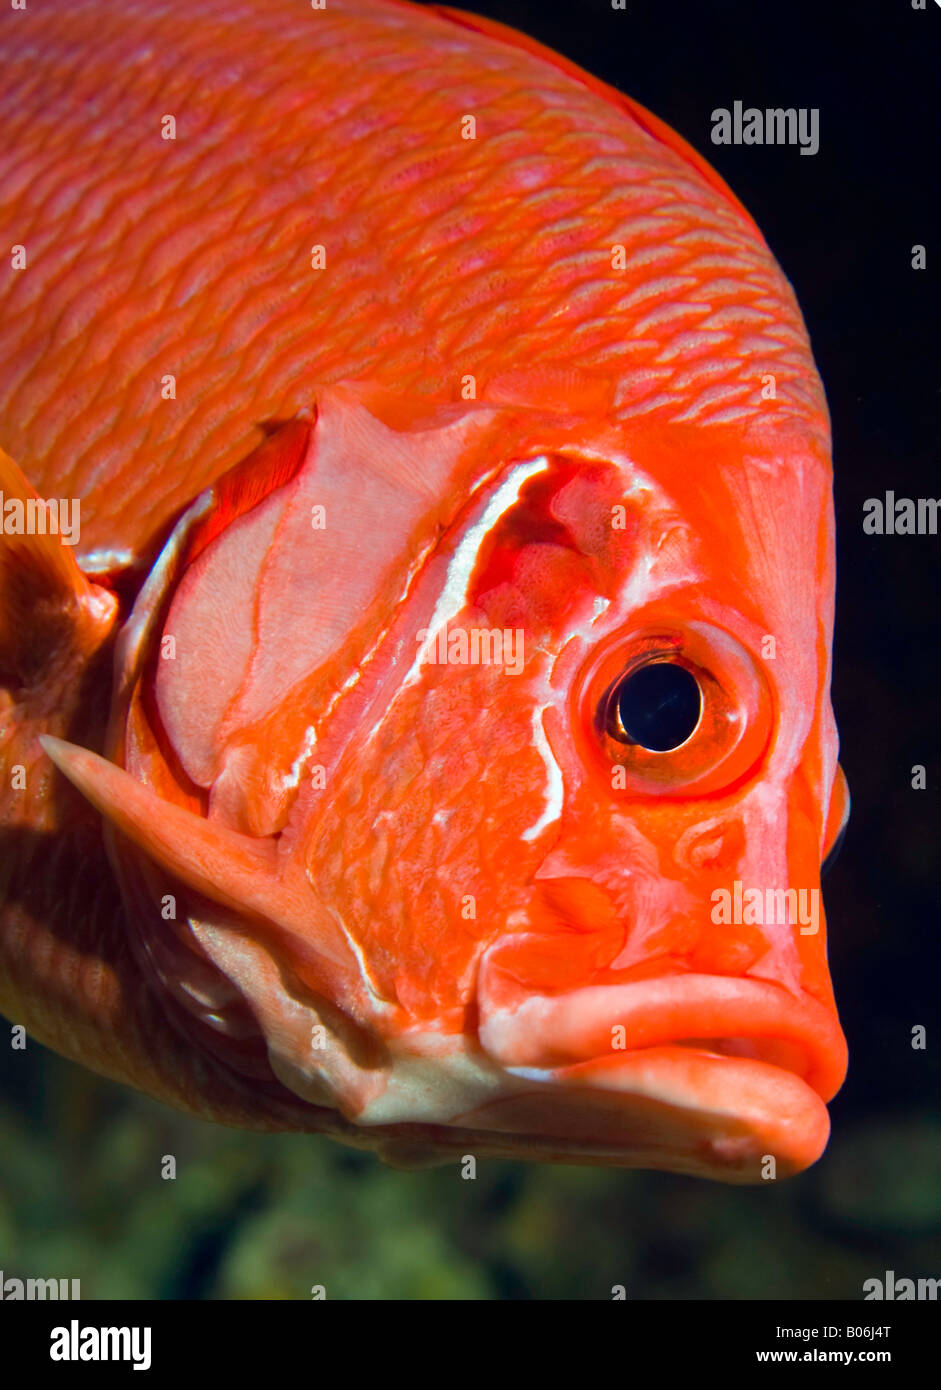 In The Red Sea near the Marsa Alam coast, this Giant, Long-Jaw or Sabre Squirrelfish paused just long enough for this portrait. Stock Photo